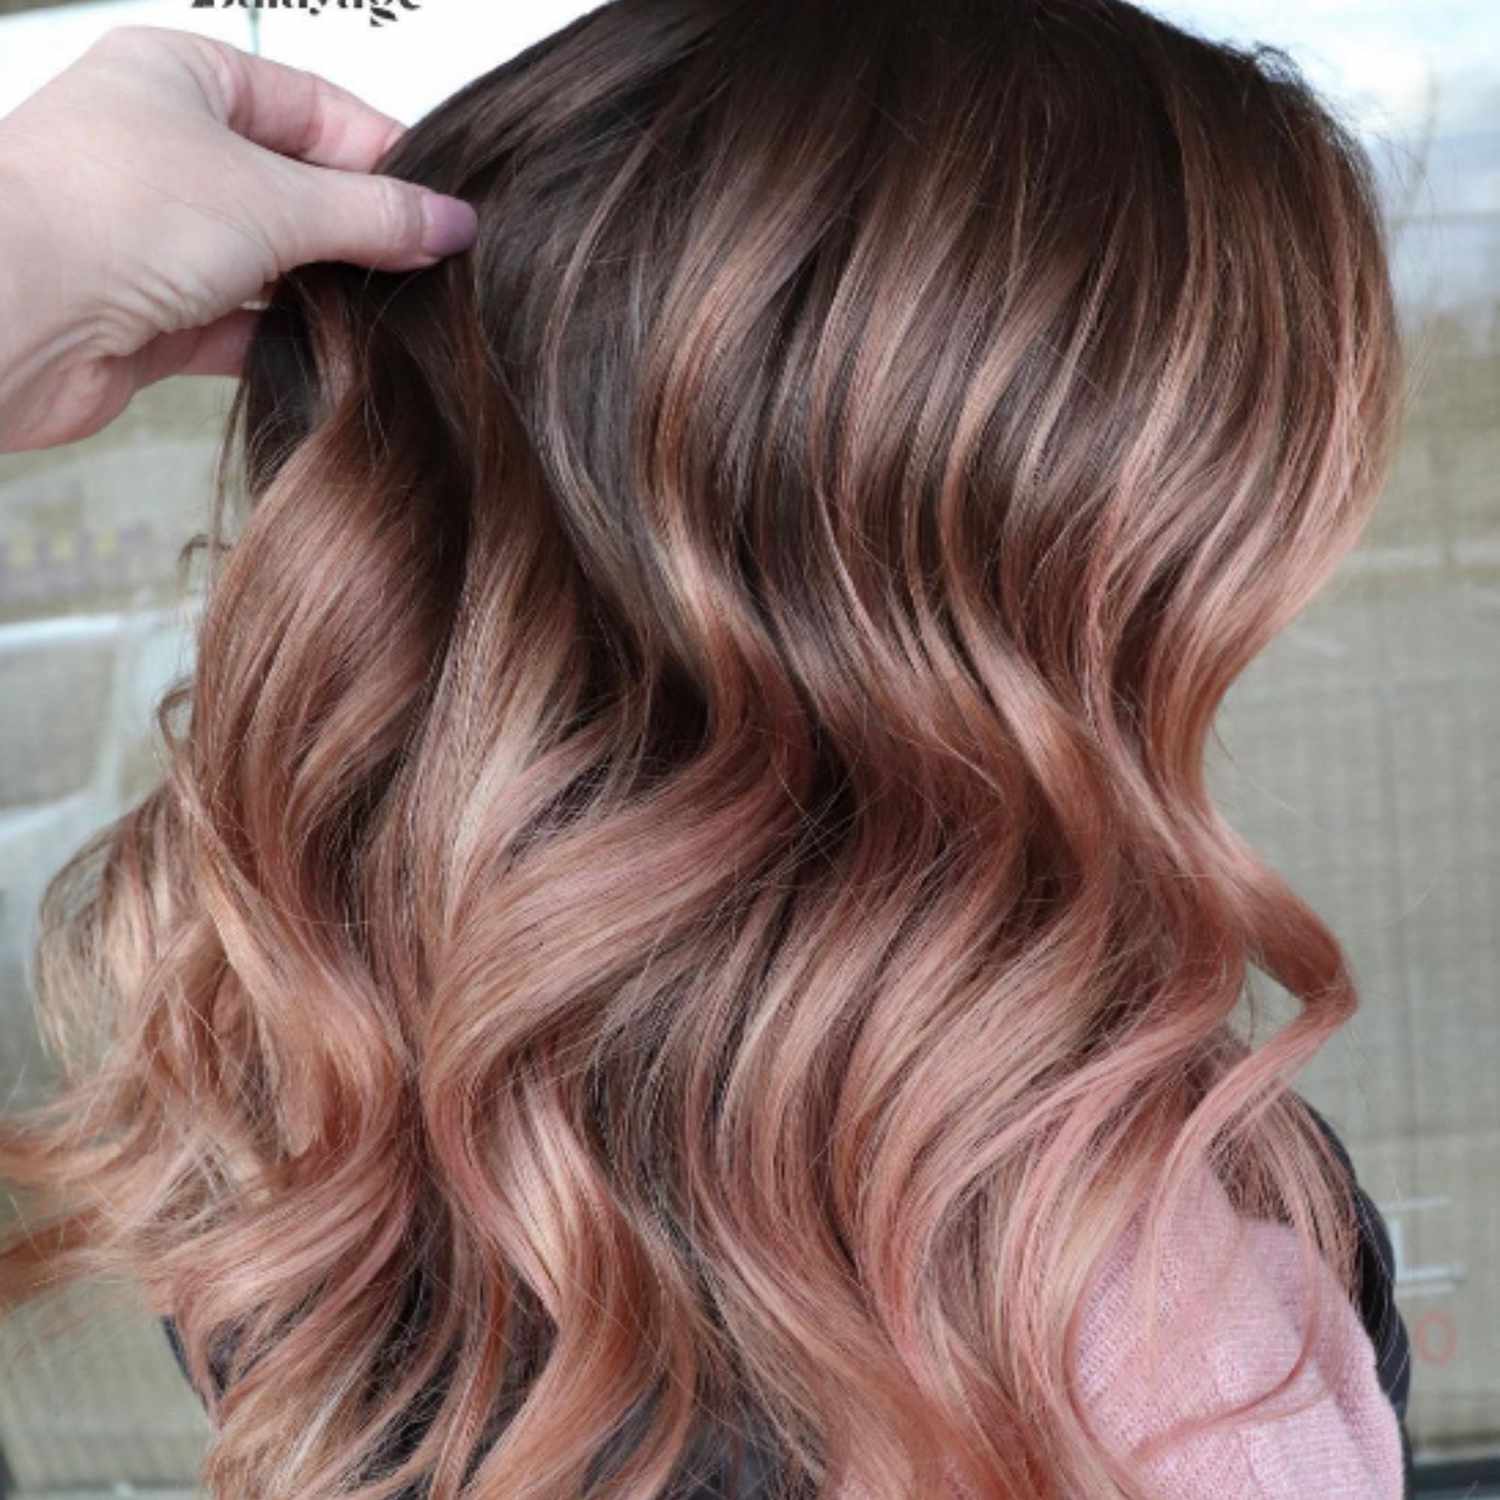 Brown balayage with a rose colored overlay.